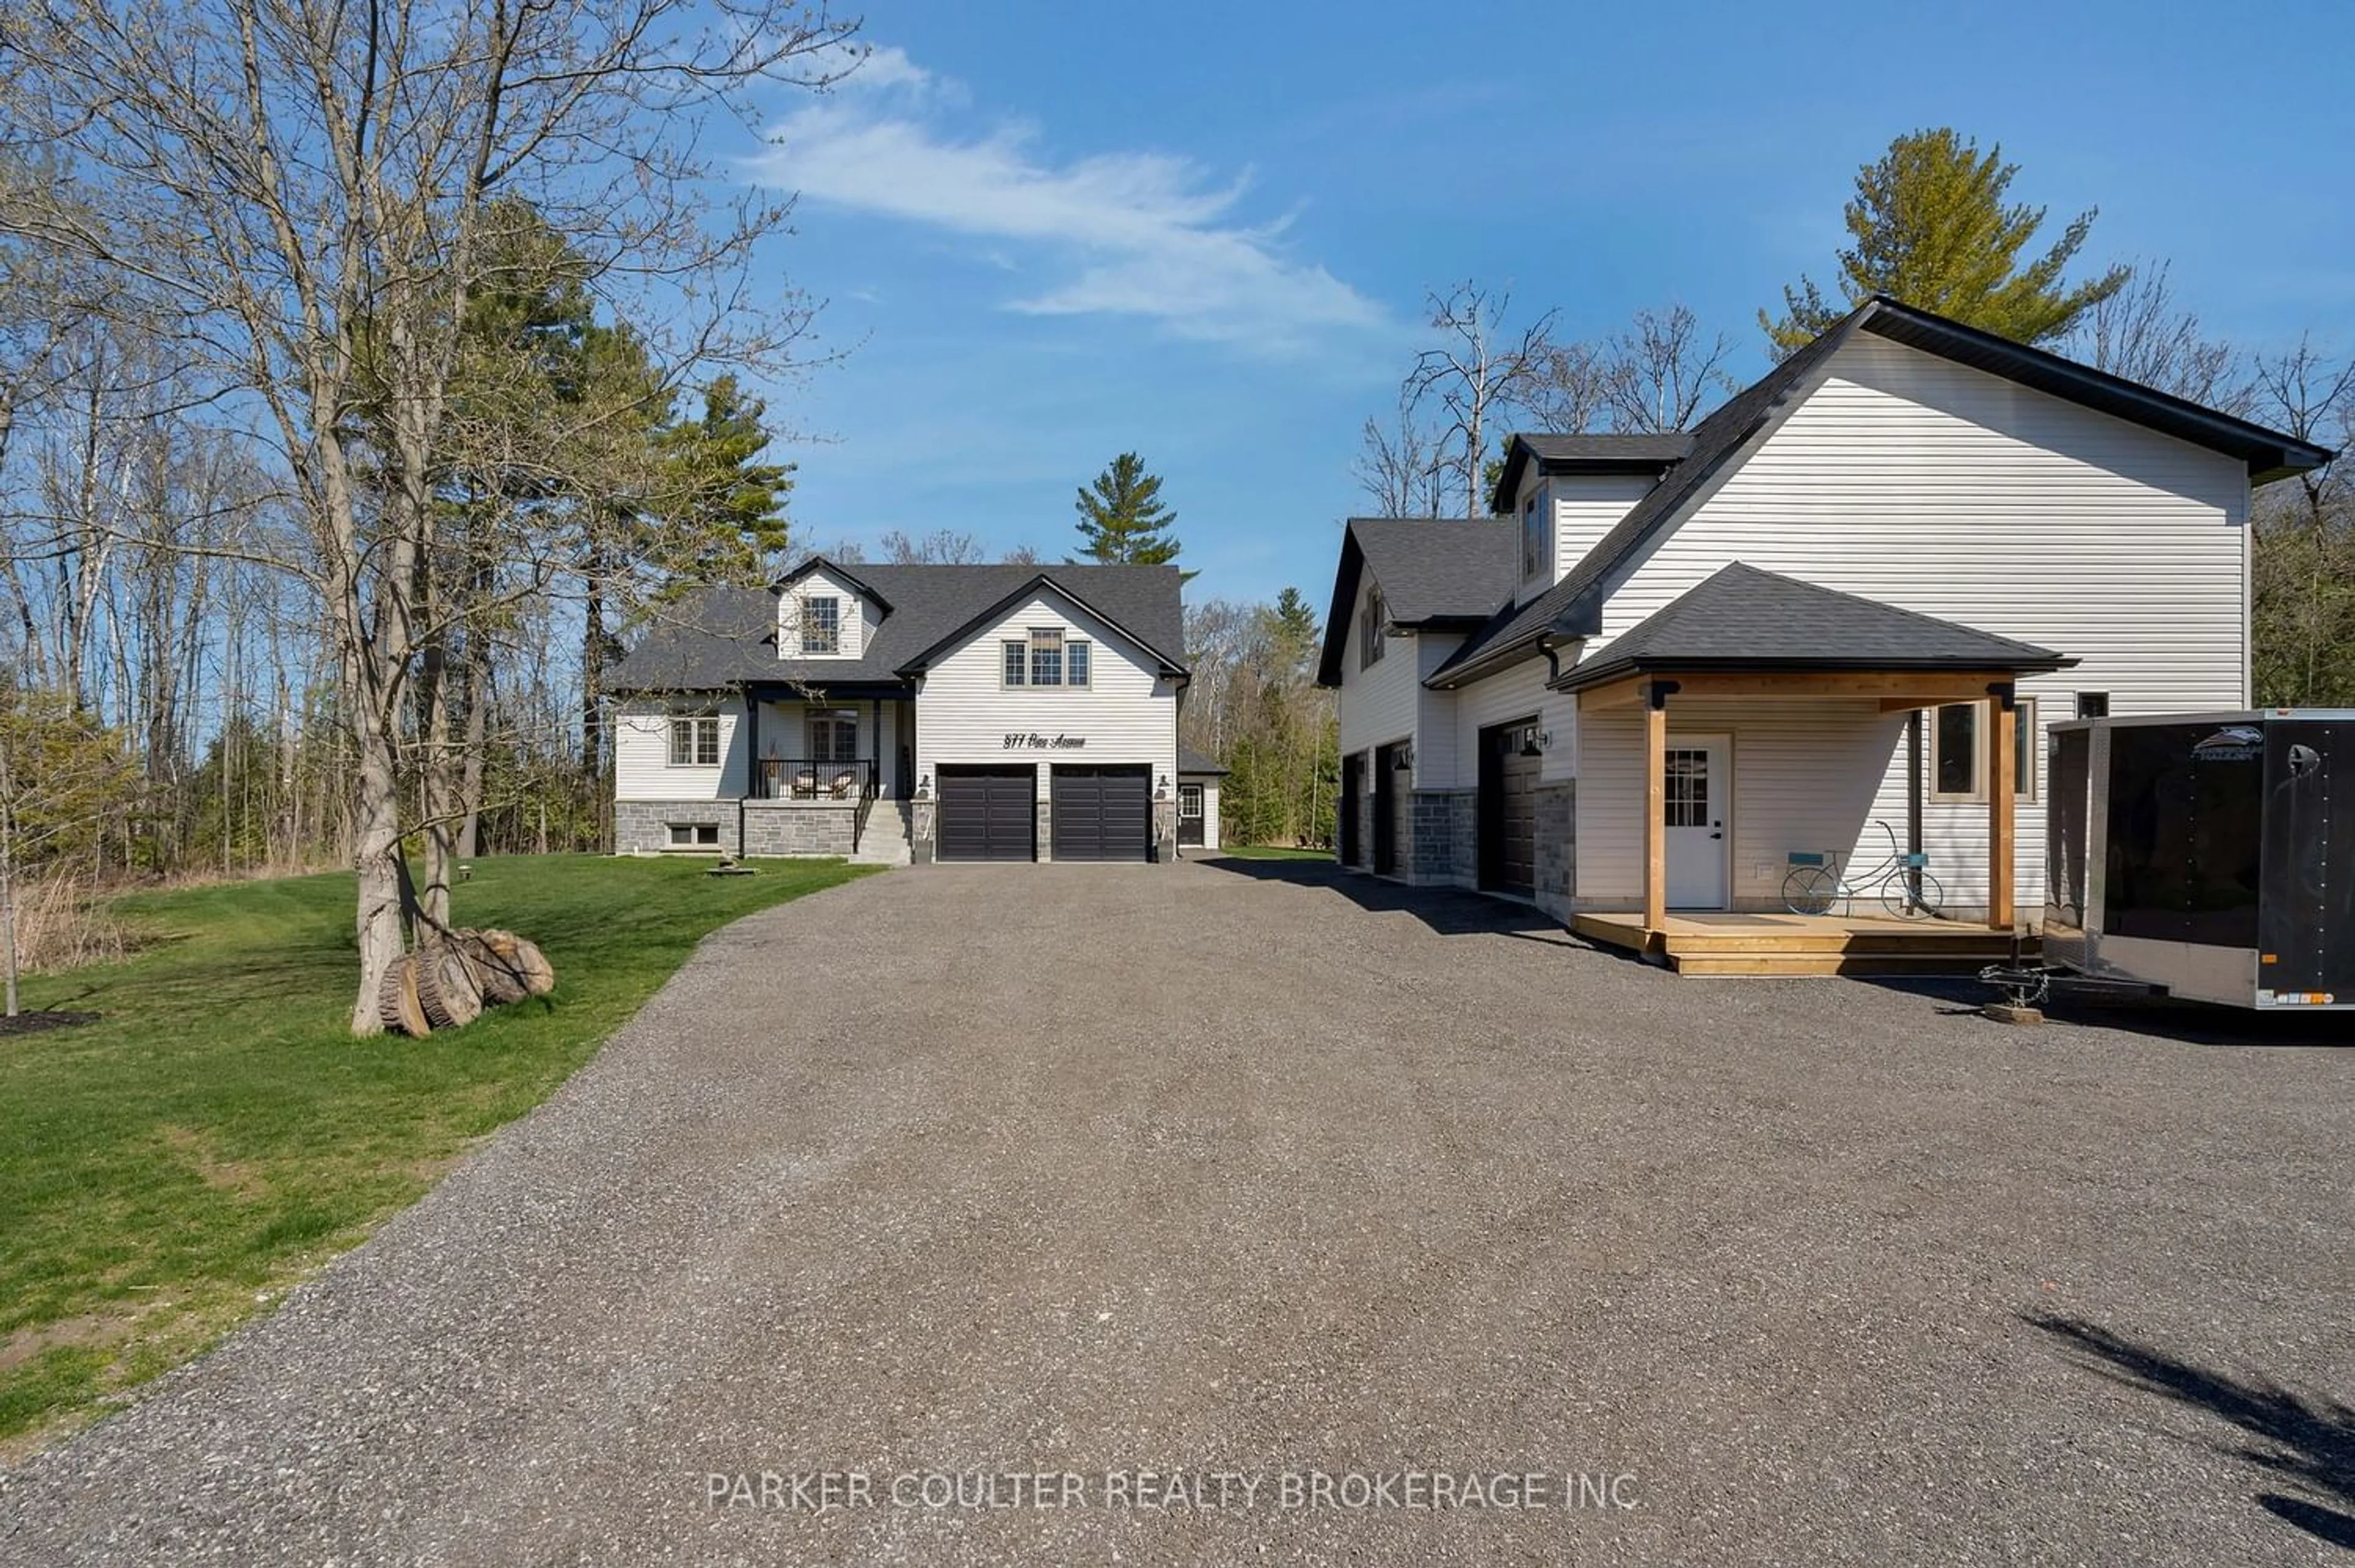 Frontside or backside of a home for 877 Pine Ave, Innisfil Ontario L0L 1W0